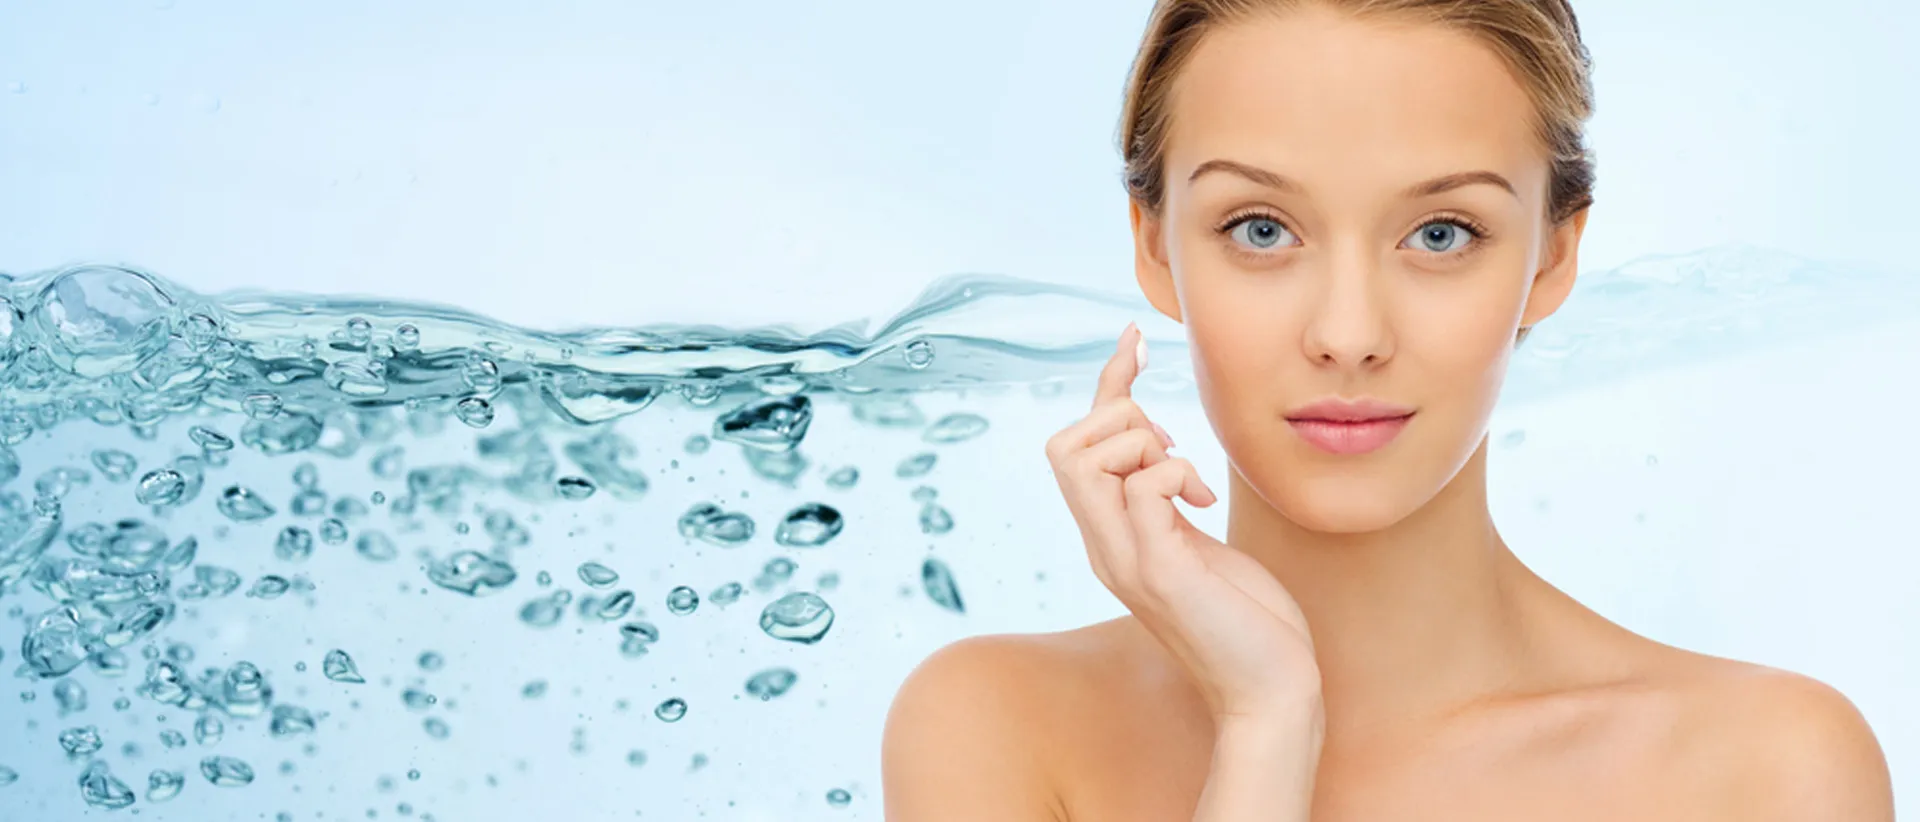 HydraFacial treatment in Hyderabad instantly cleans and hydrates the skin. Girl with clear and hydrated skin.
